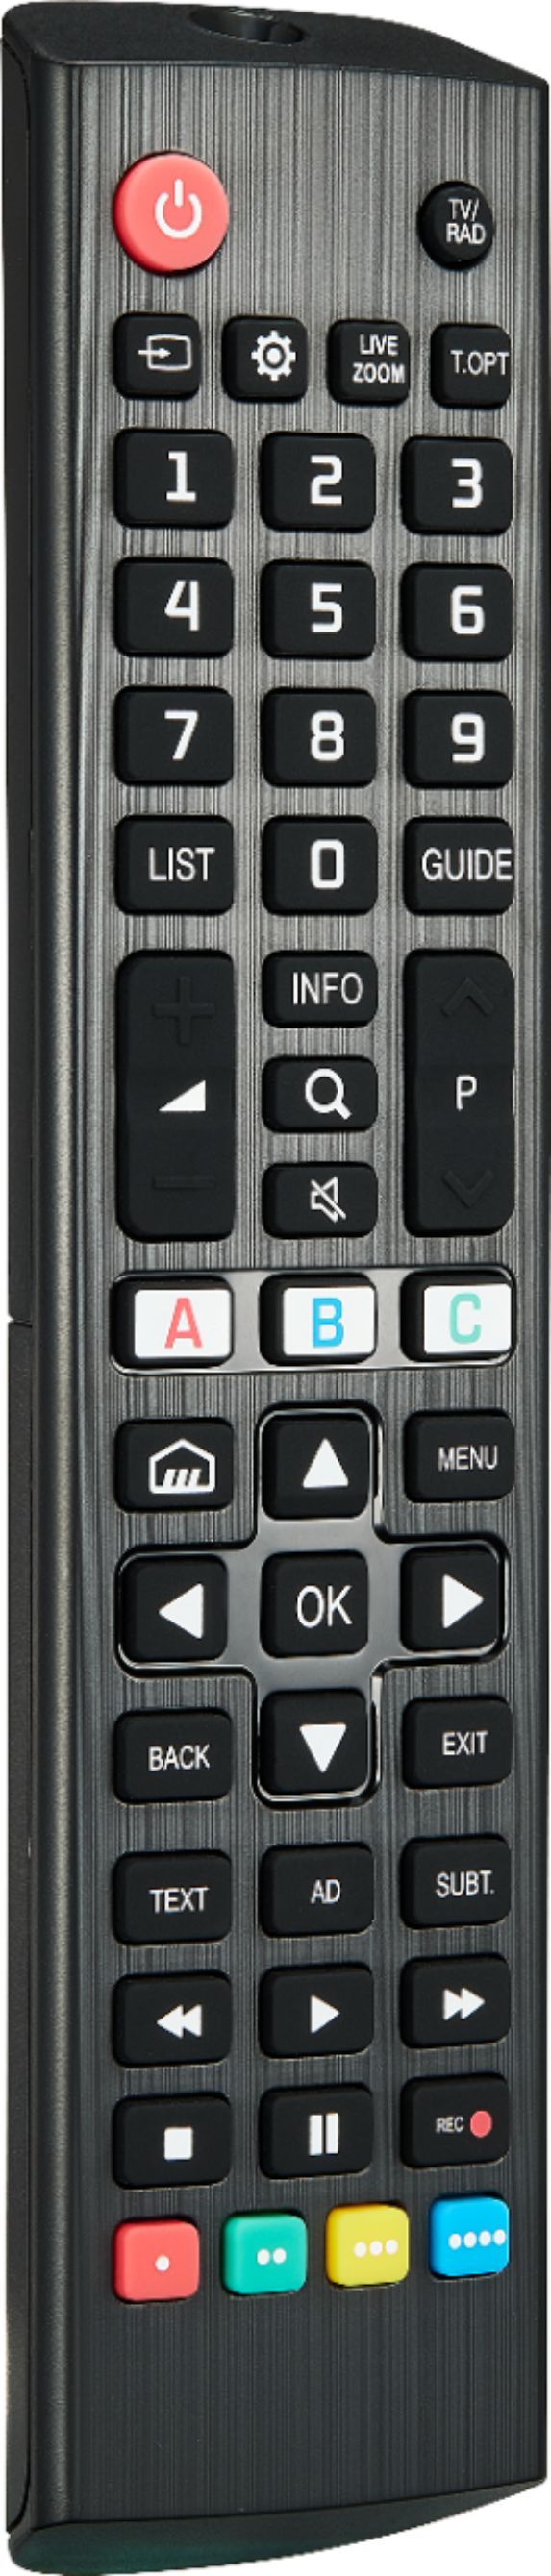 Insignia™ - Replacement Remote for LG TVs - Black